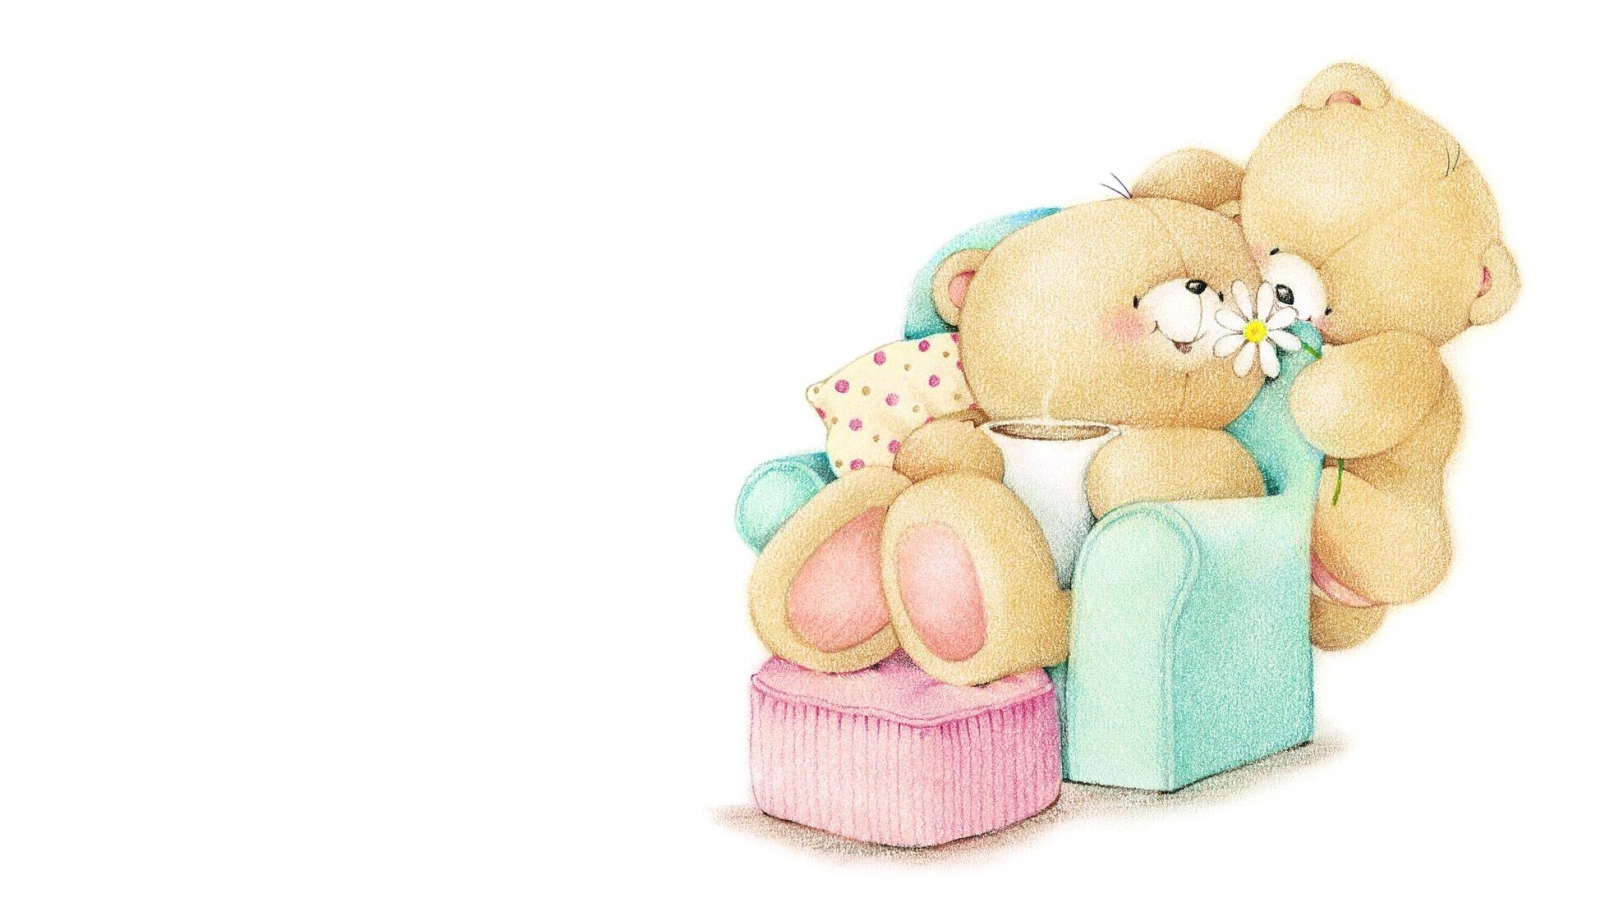 Loving Teddy bears on a white background